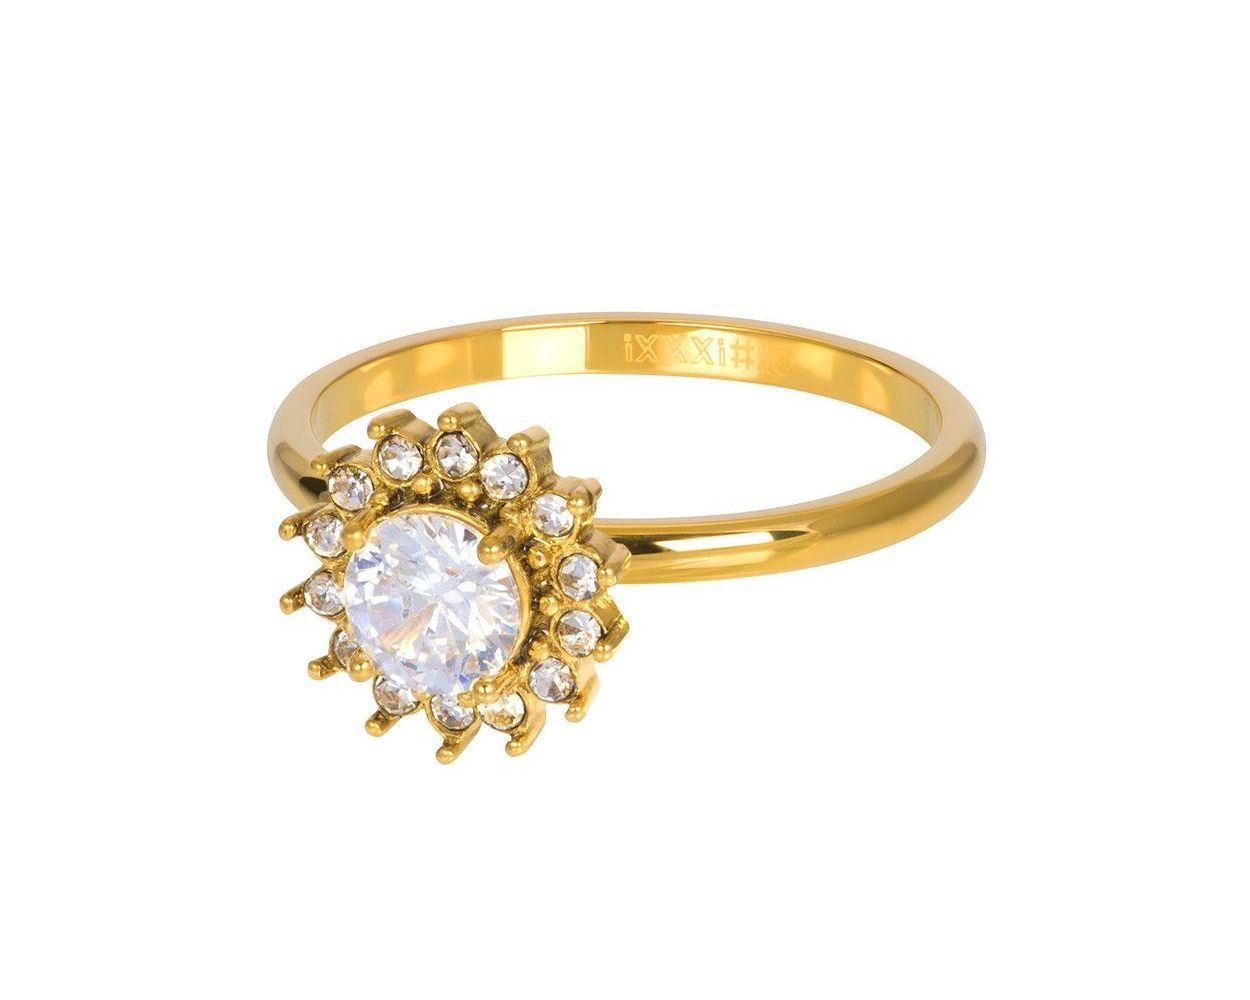 iXXXi Fame Ring Lucia - F06200-01